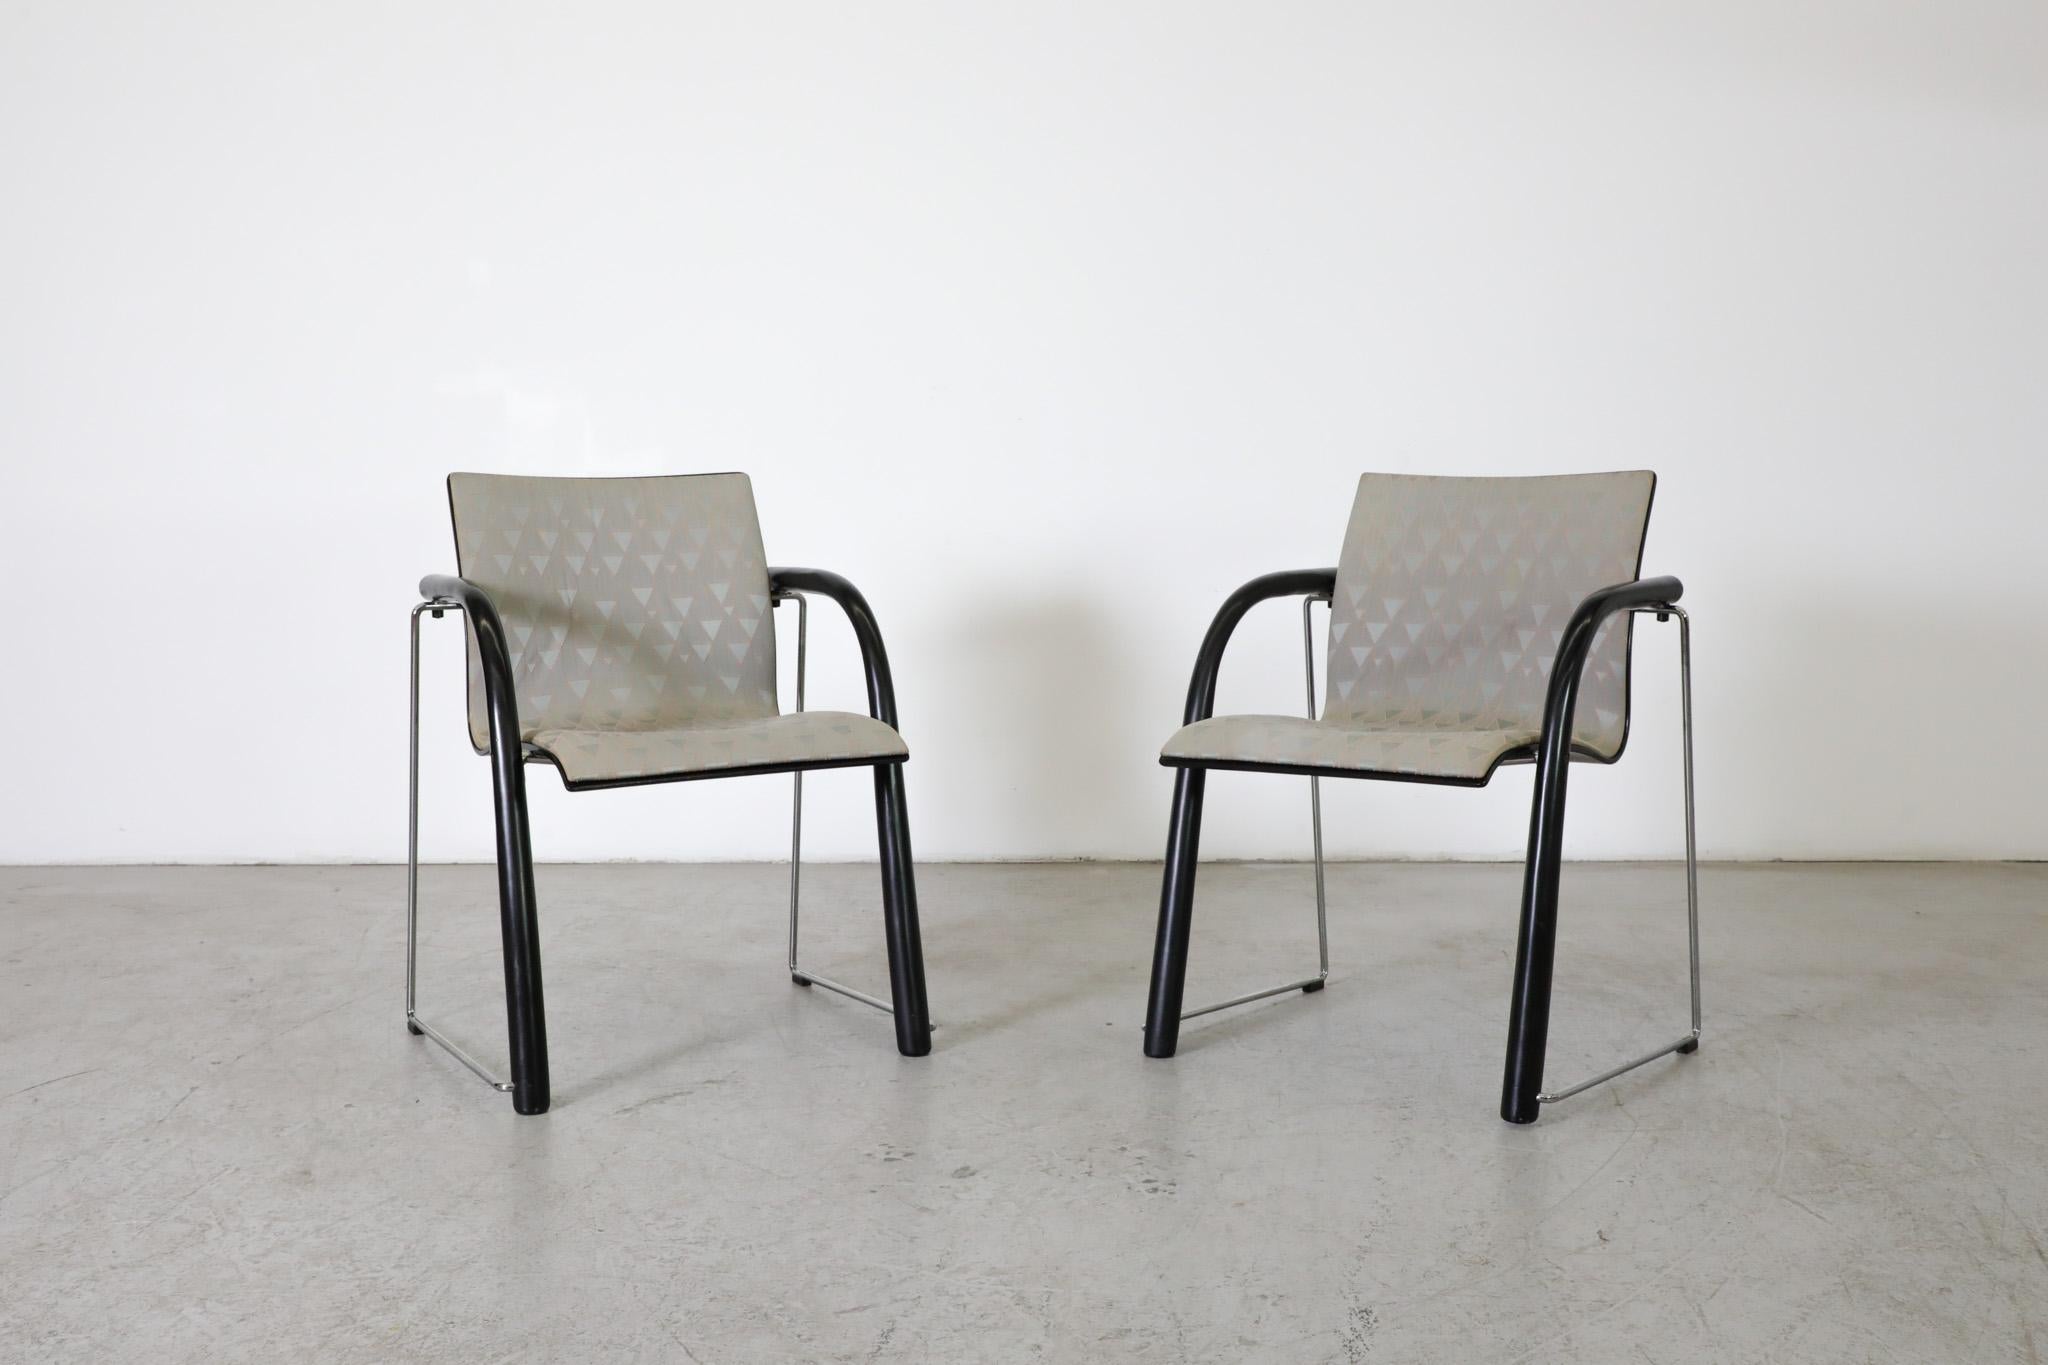 Pair of Thonet S320 by Wulf Schneider & Ulrich Böhme Chairs w/ Black Curved Arms In Good Condition For Sale In Los Angeles, CA